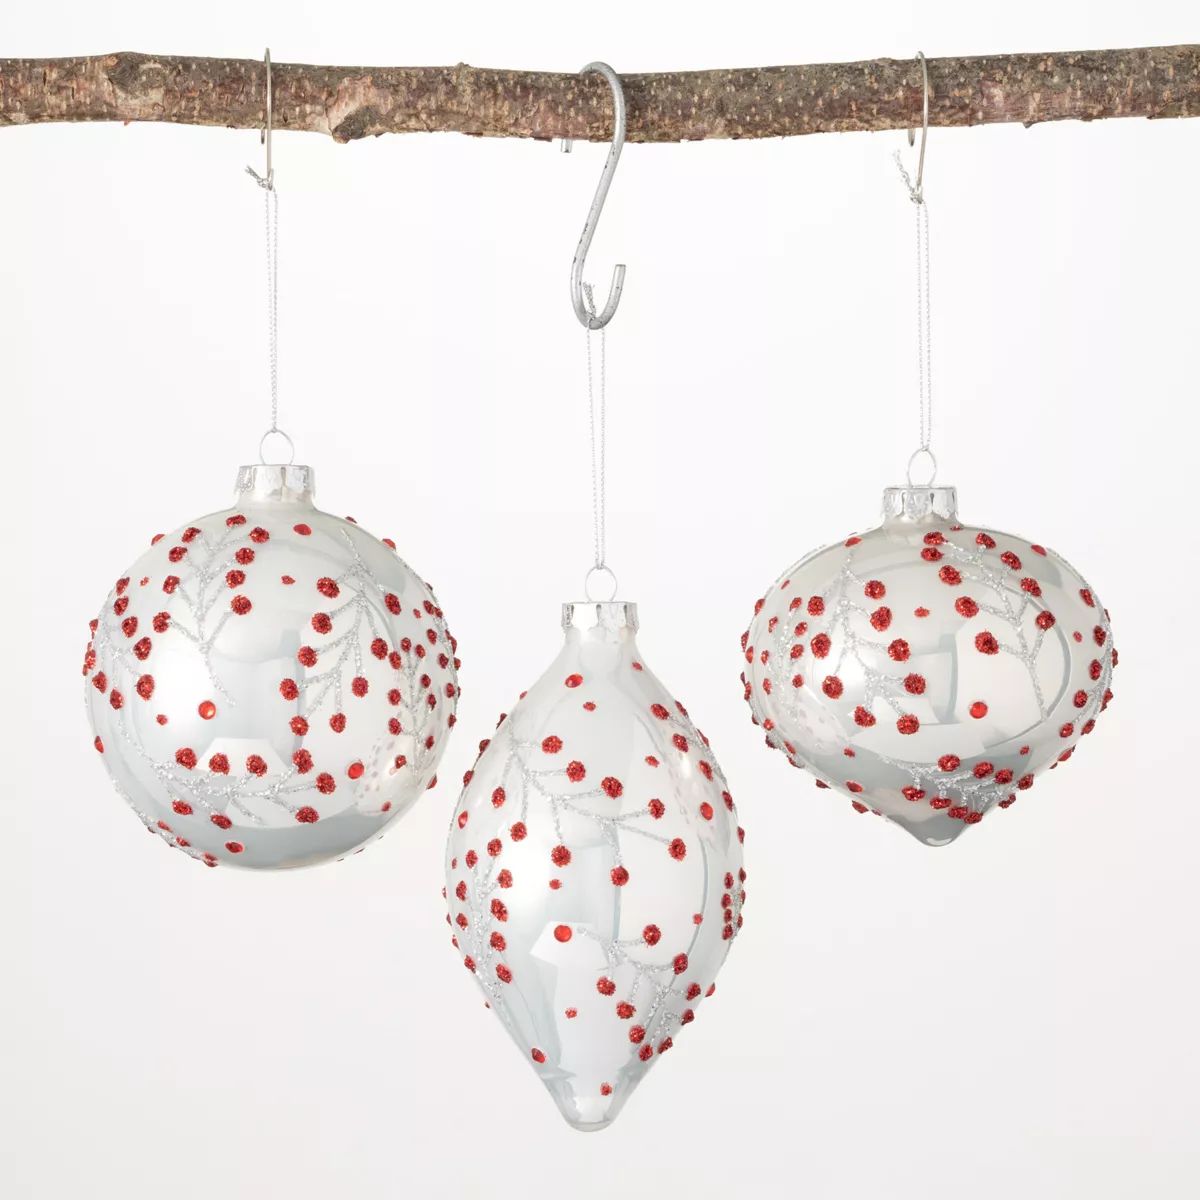 4"H, 4"H and 6"H Sullivans Holly Berry Ornament Set of 3; Red Christmas Ornaments | Target